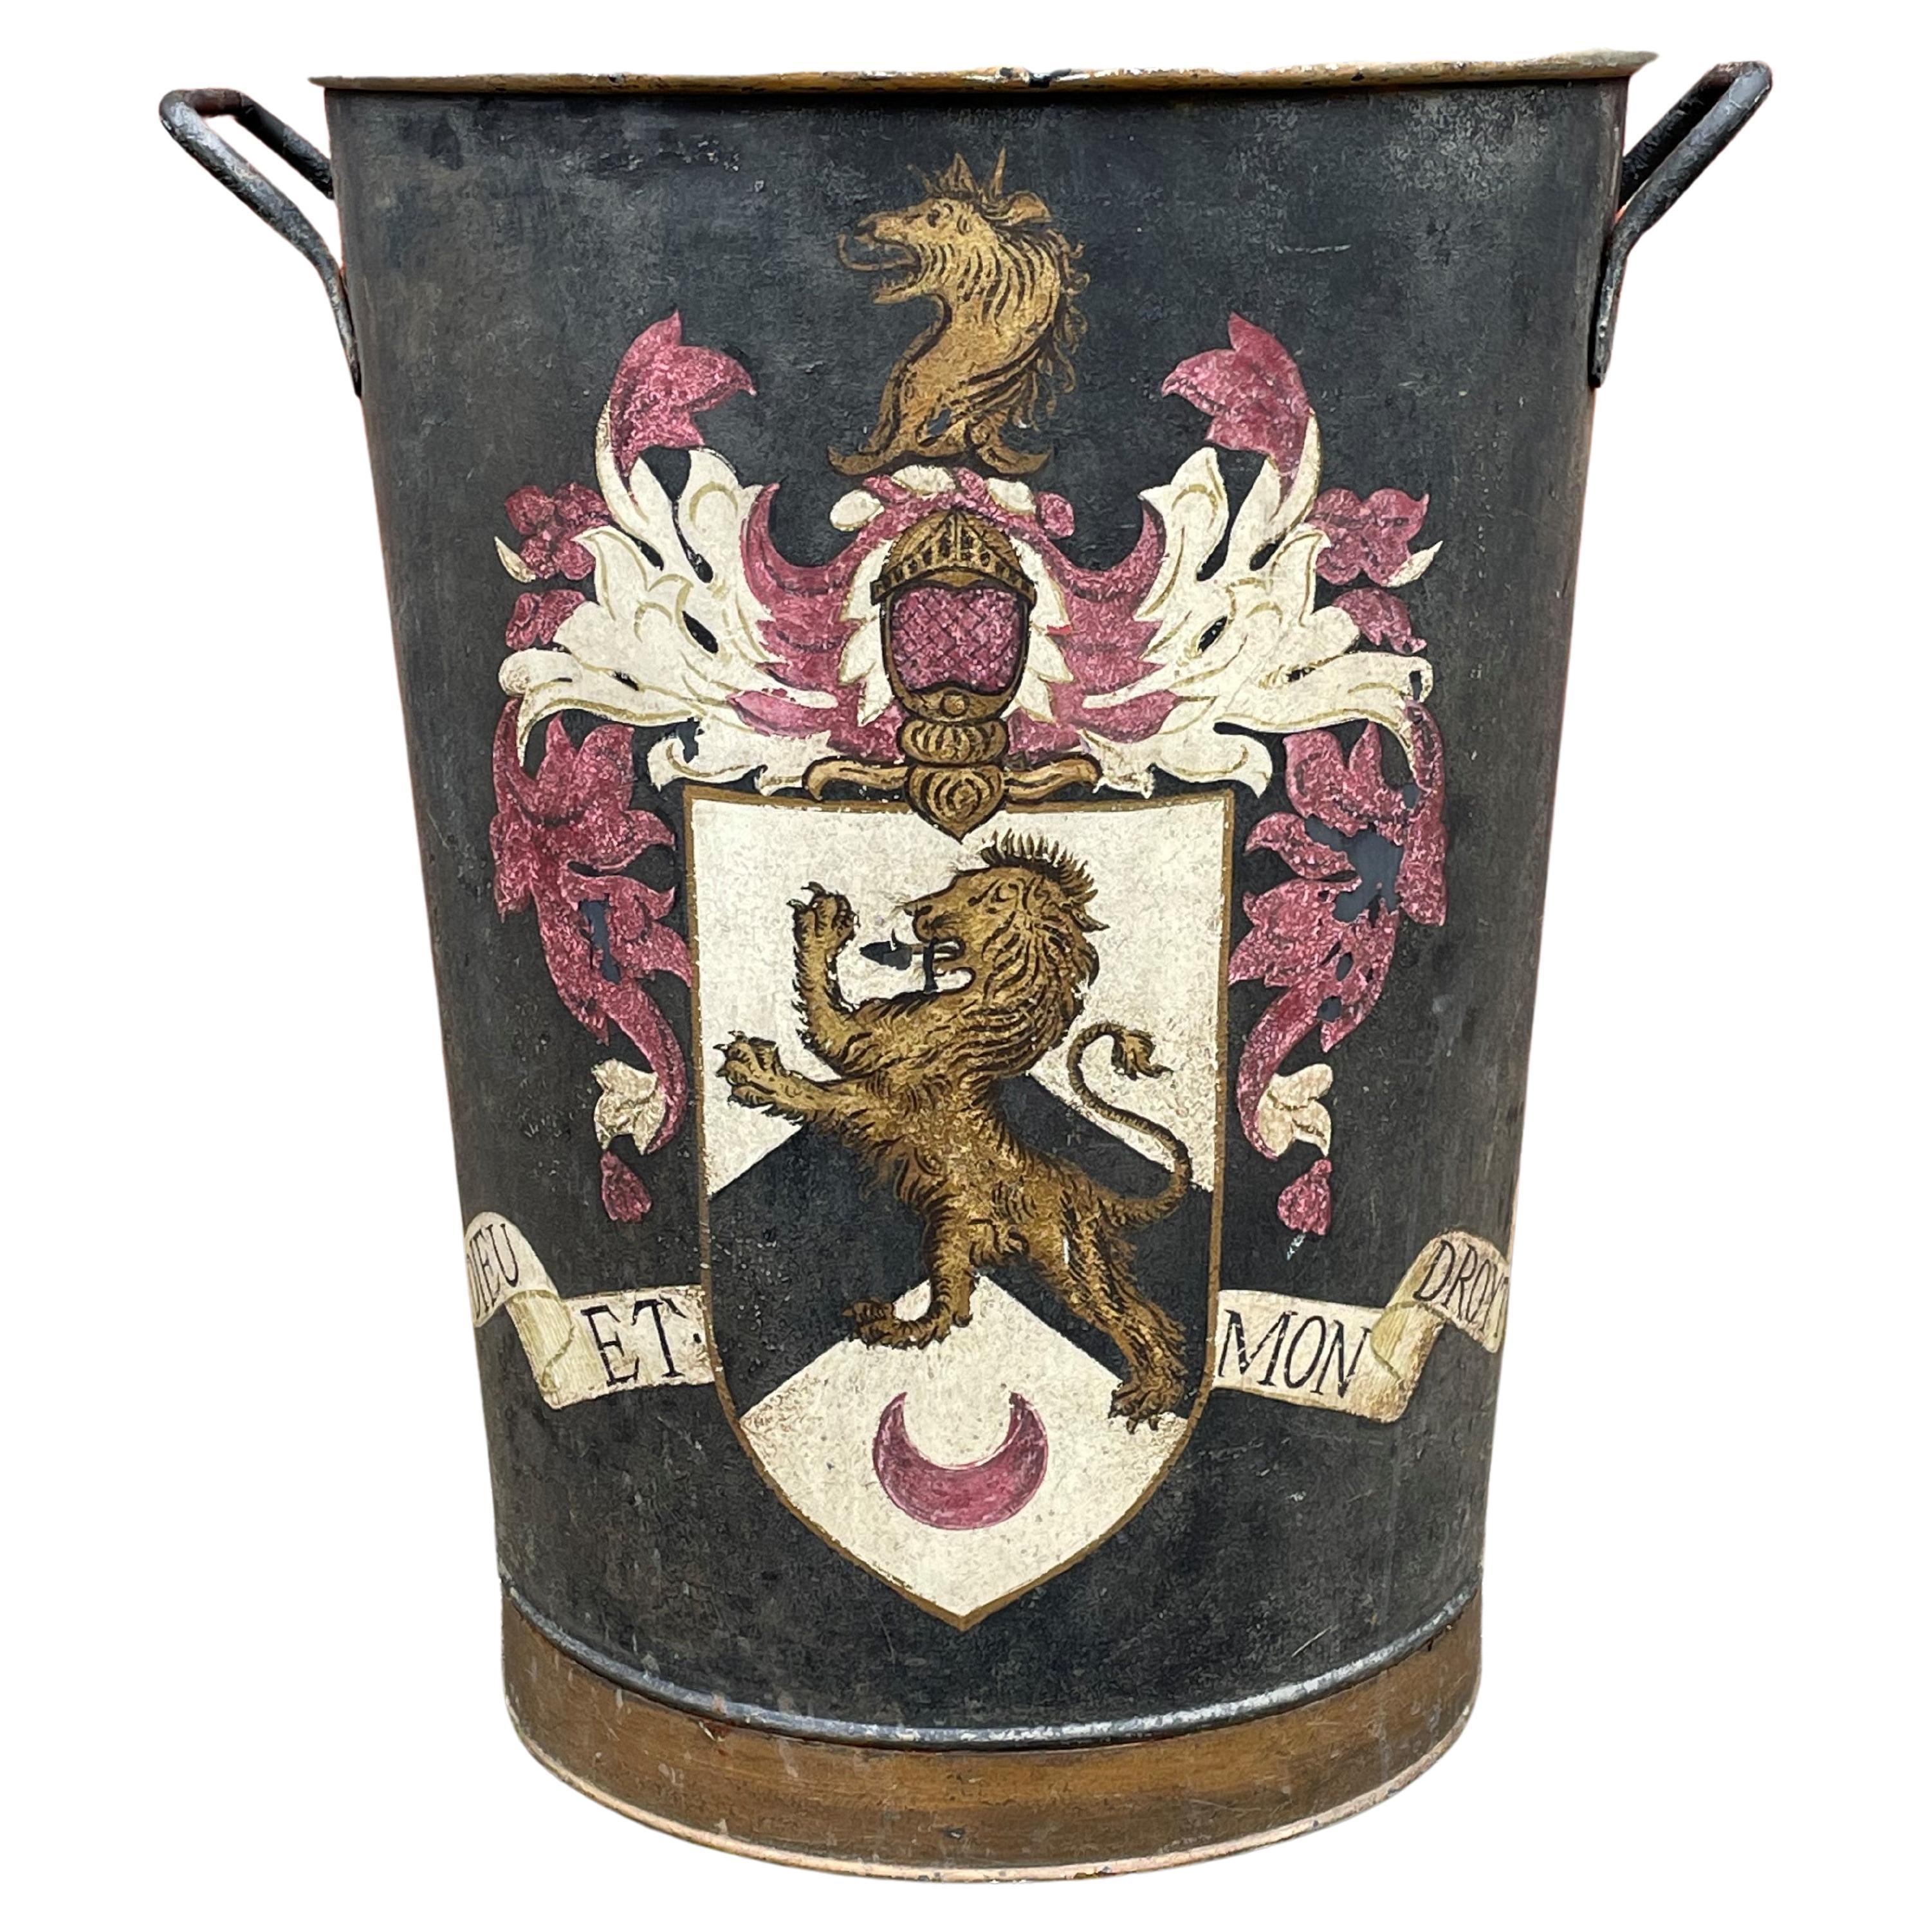 Largest Antique Firewood Bucket / Planter with British Crest 'God and My Right'